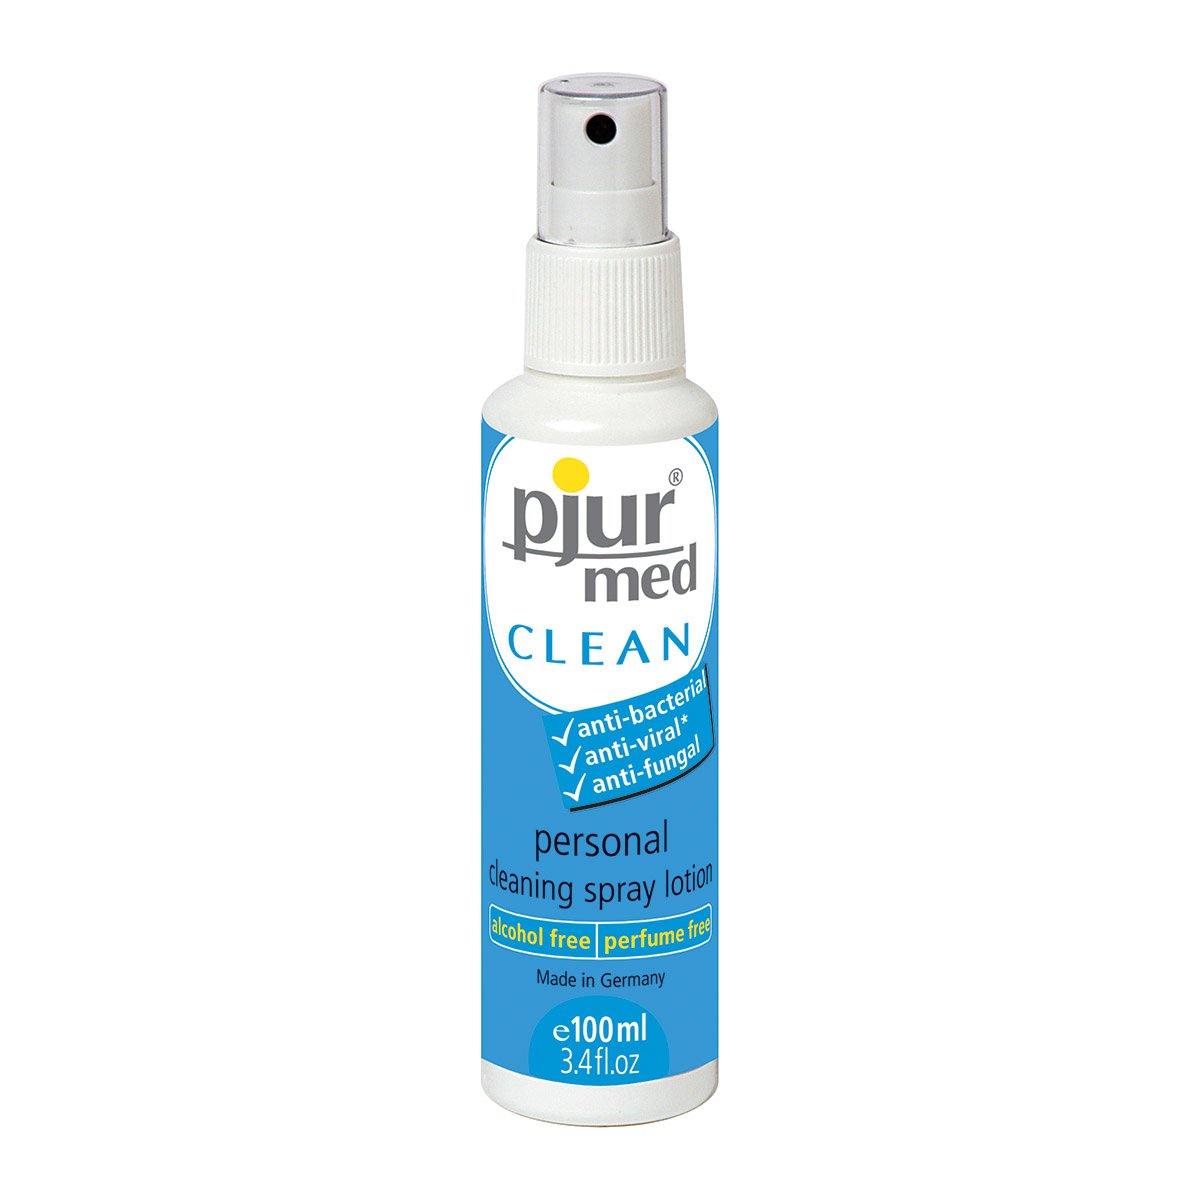 Pjur Med Clean Bottle - Buy At Luxury Toy X - Free 3-Day Shipping